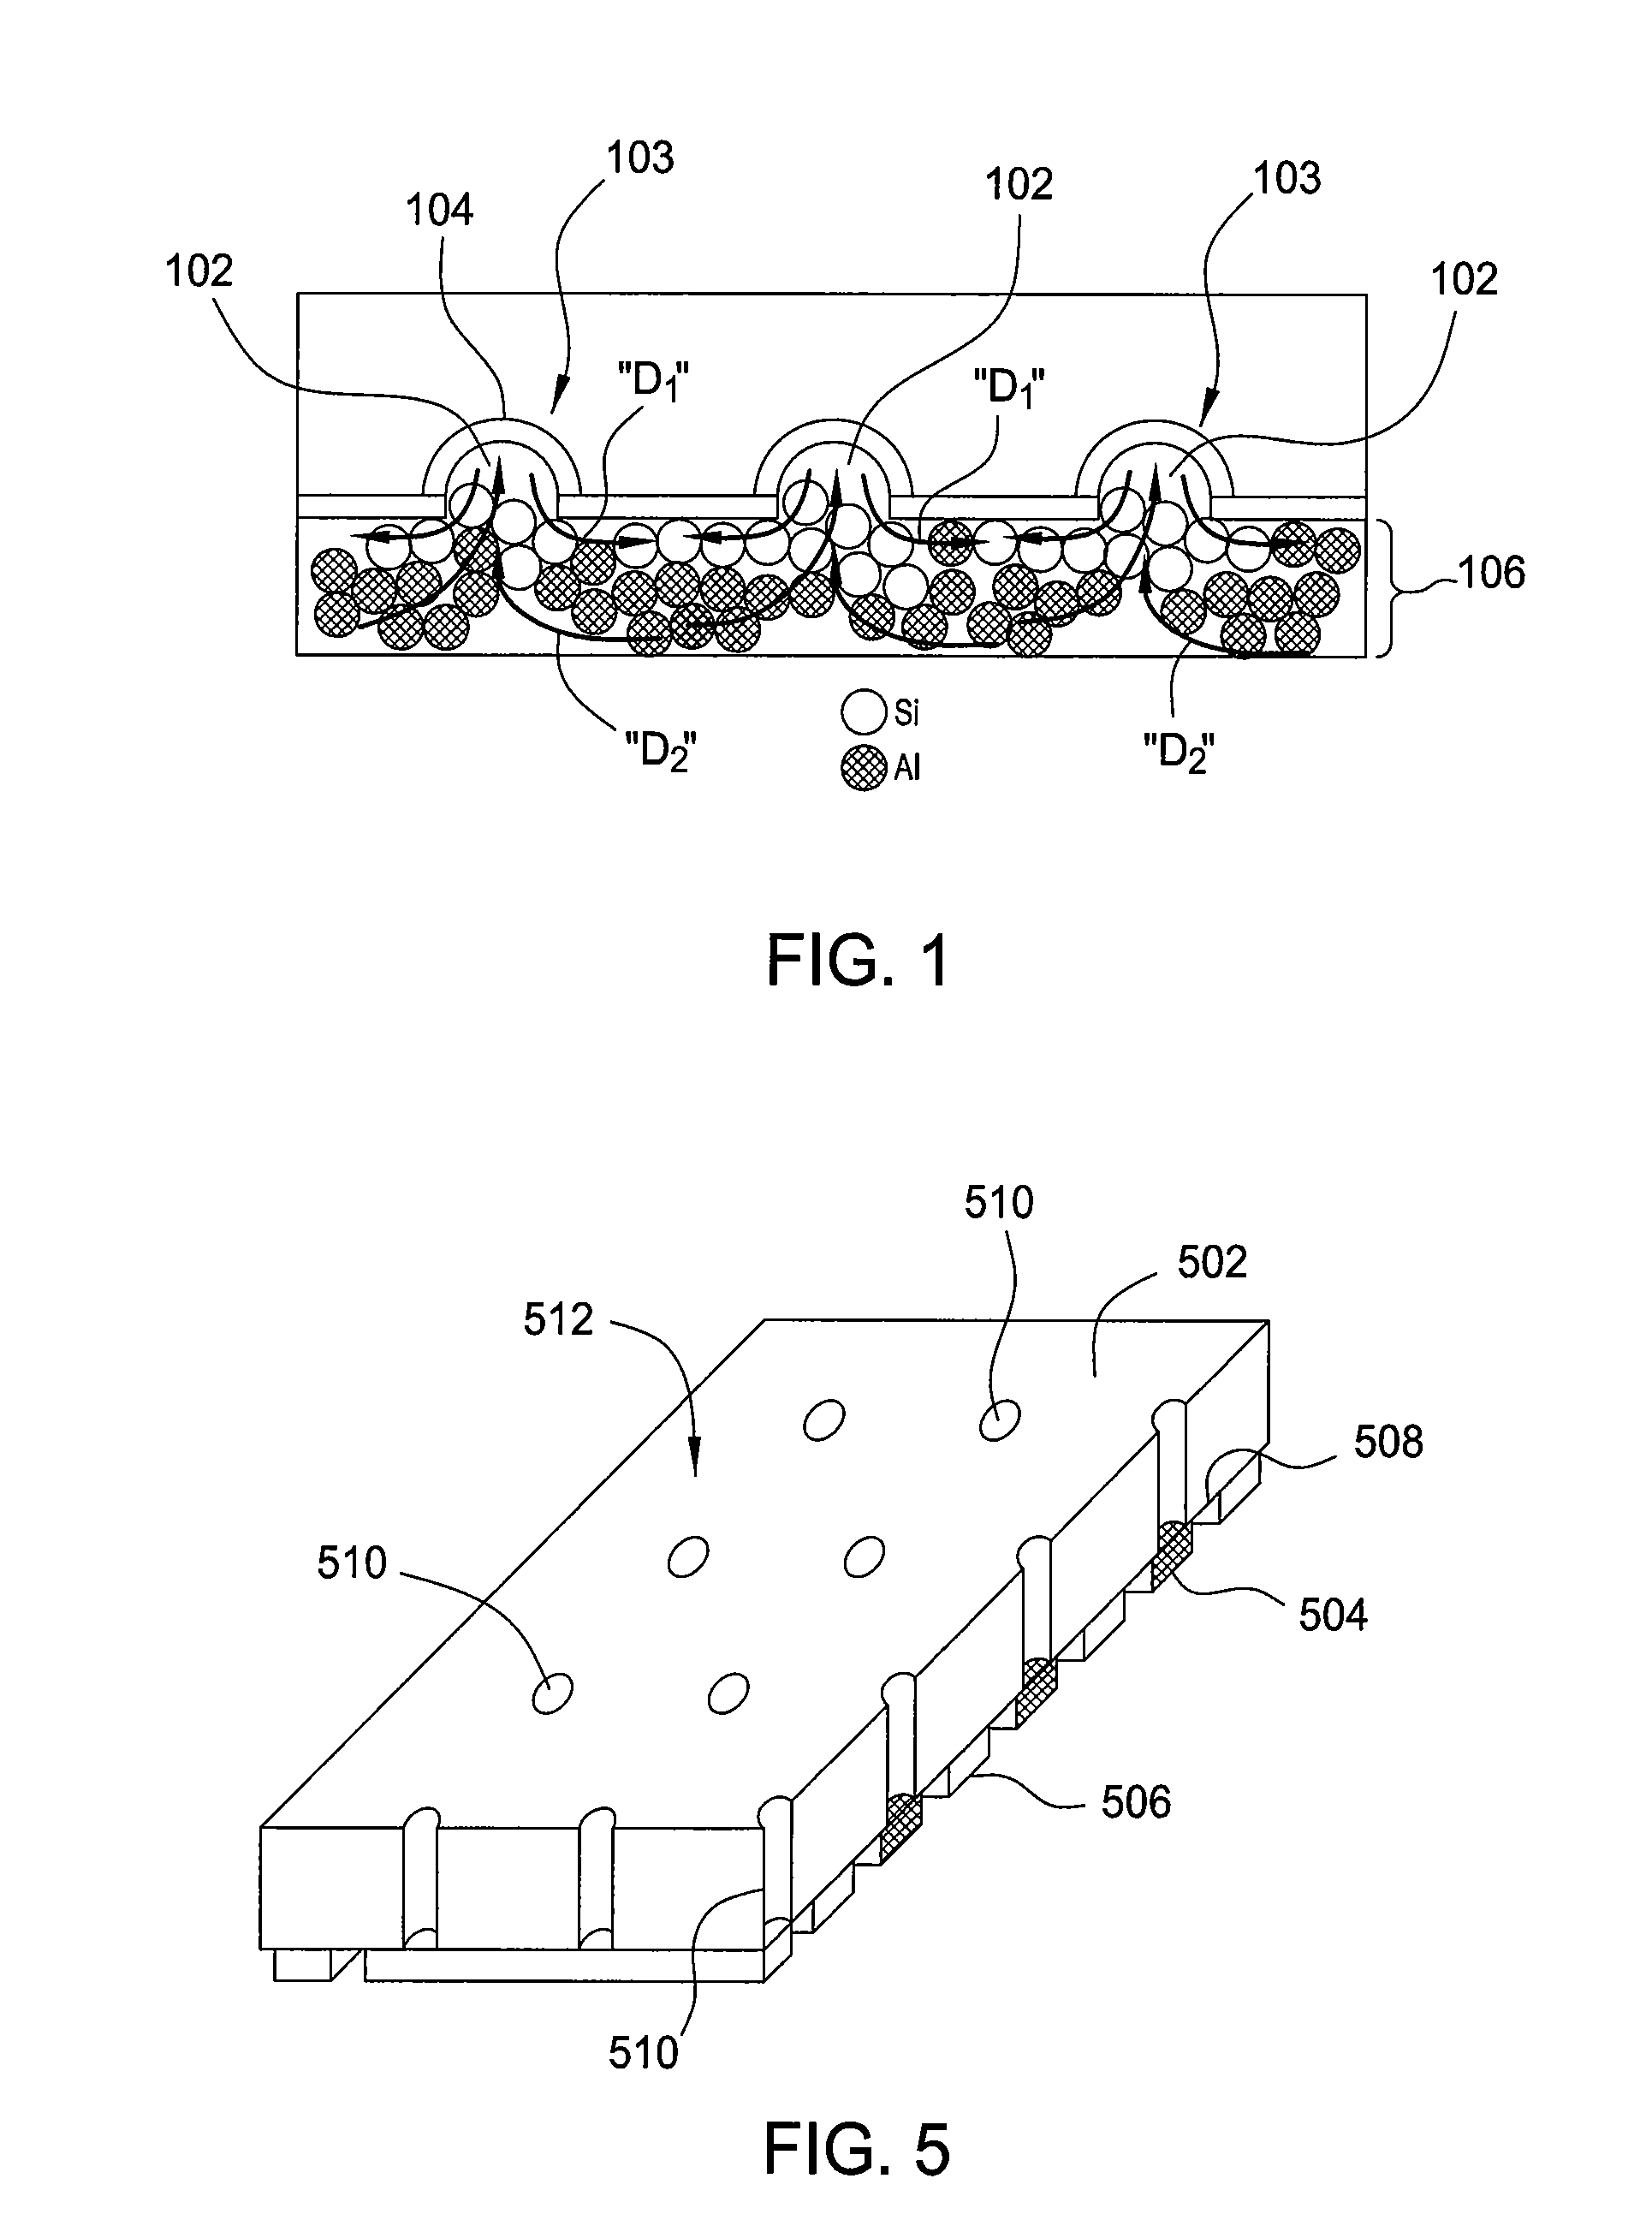 Doped ai paste for local alloyed junction formation with low contact resistance